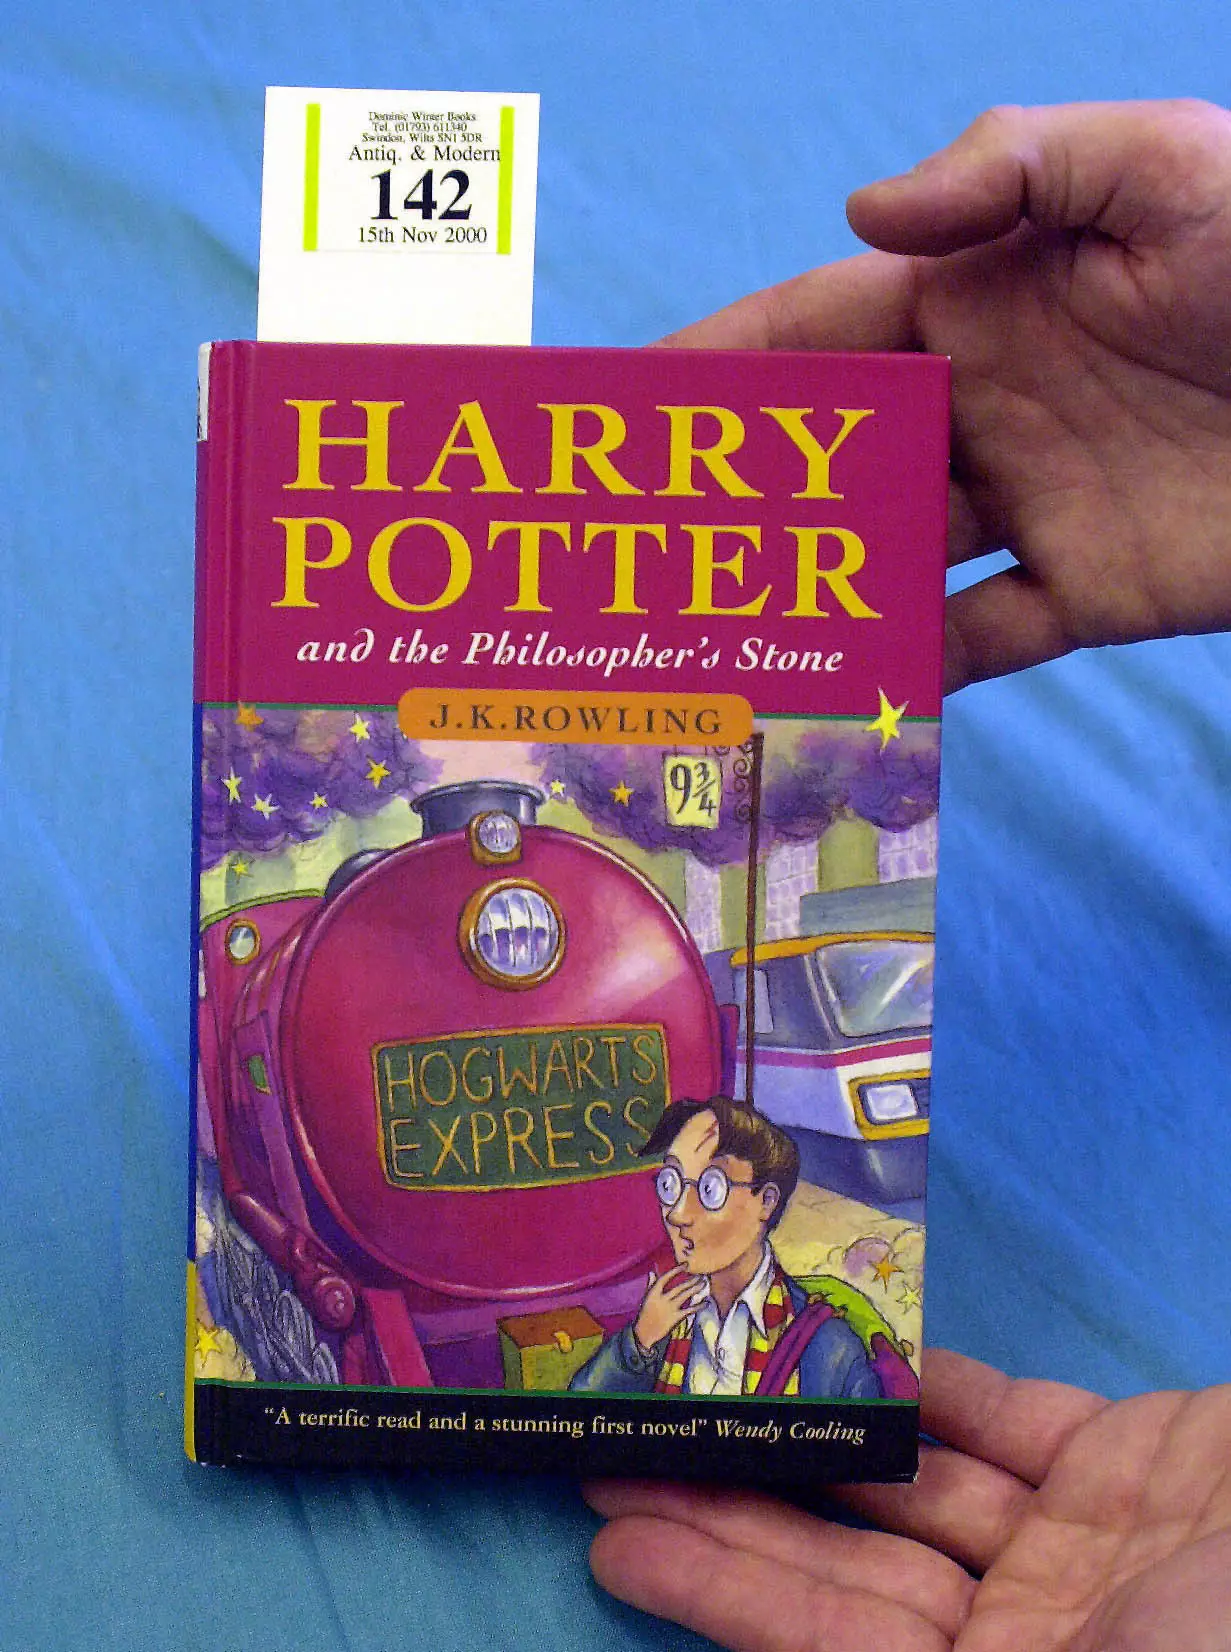 Another first edition of the book, sold at auction in 2000.